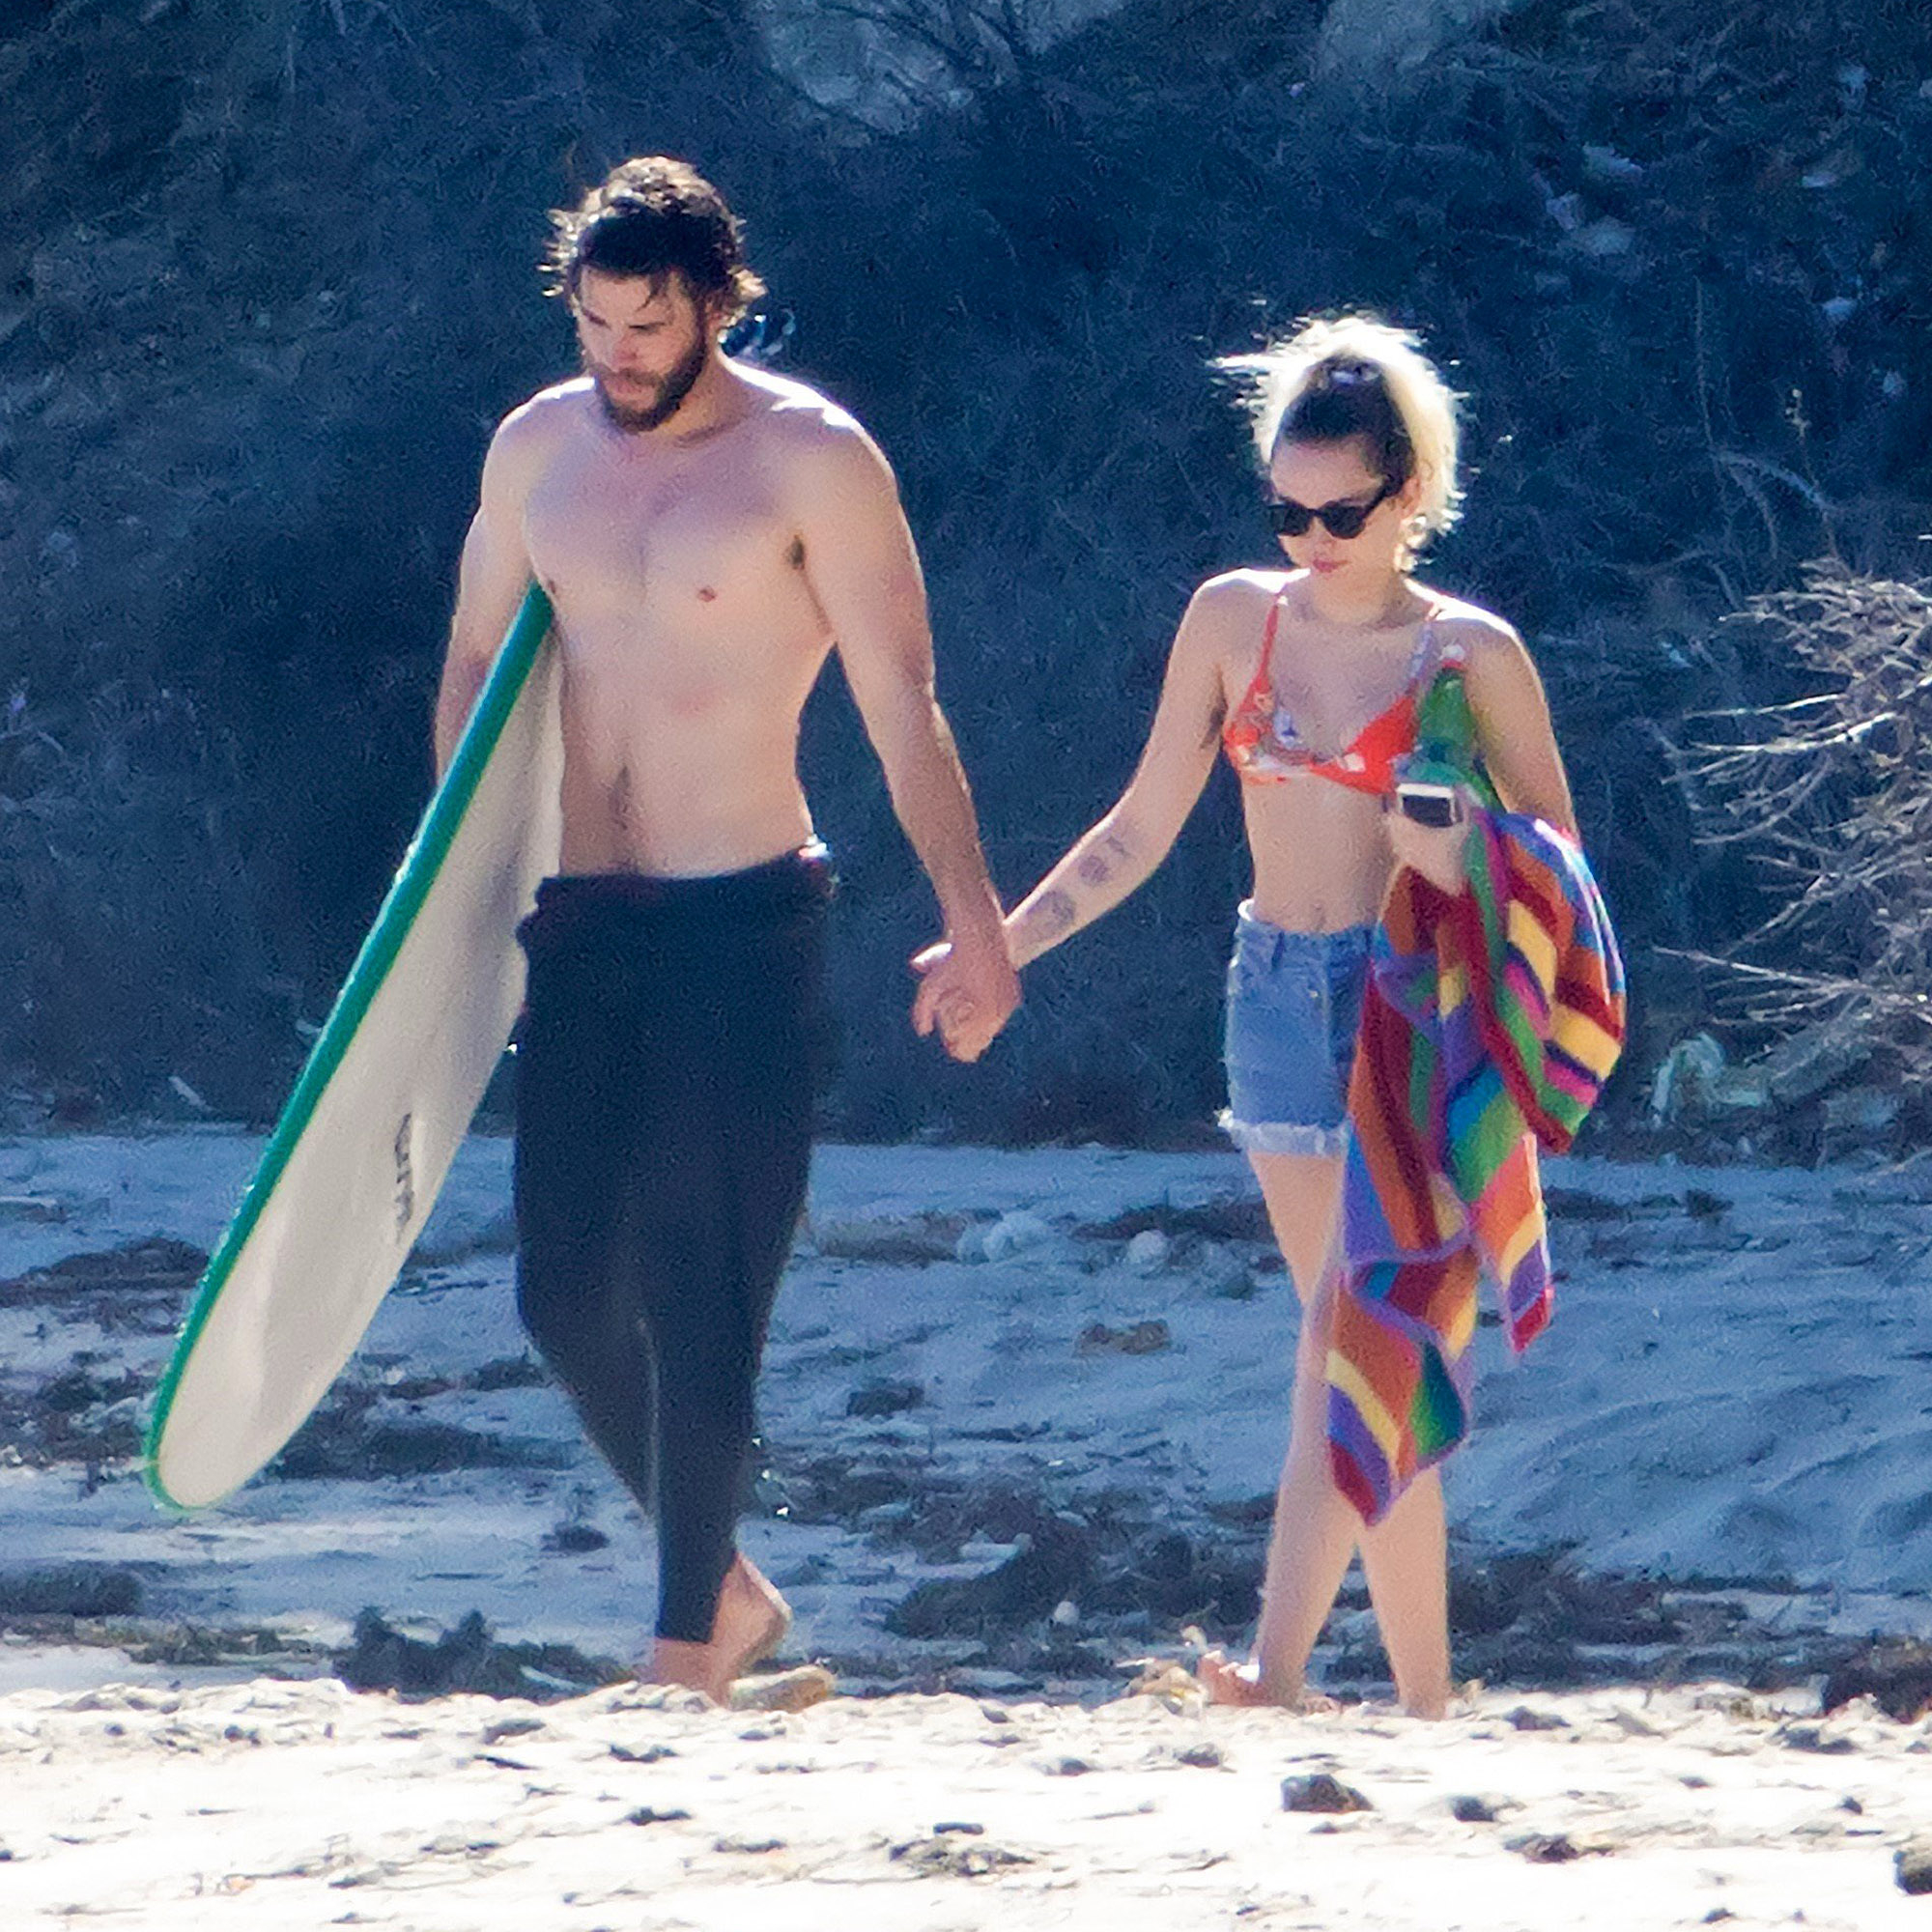 Miley Cyrus, Liam Hemsworth Hold Hands on Beach in Malibu pic pic